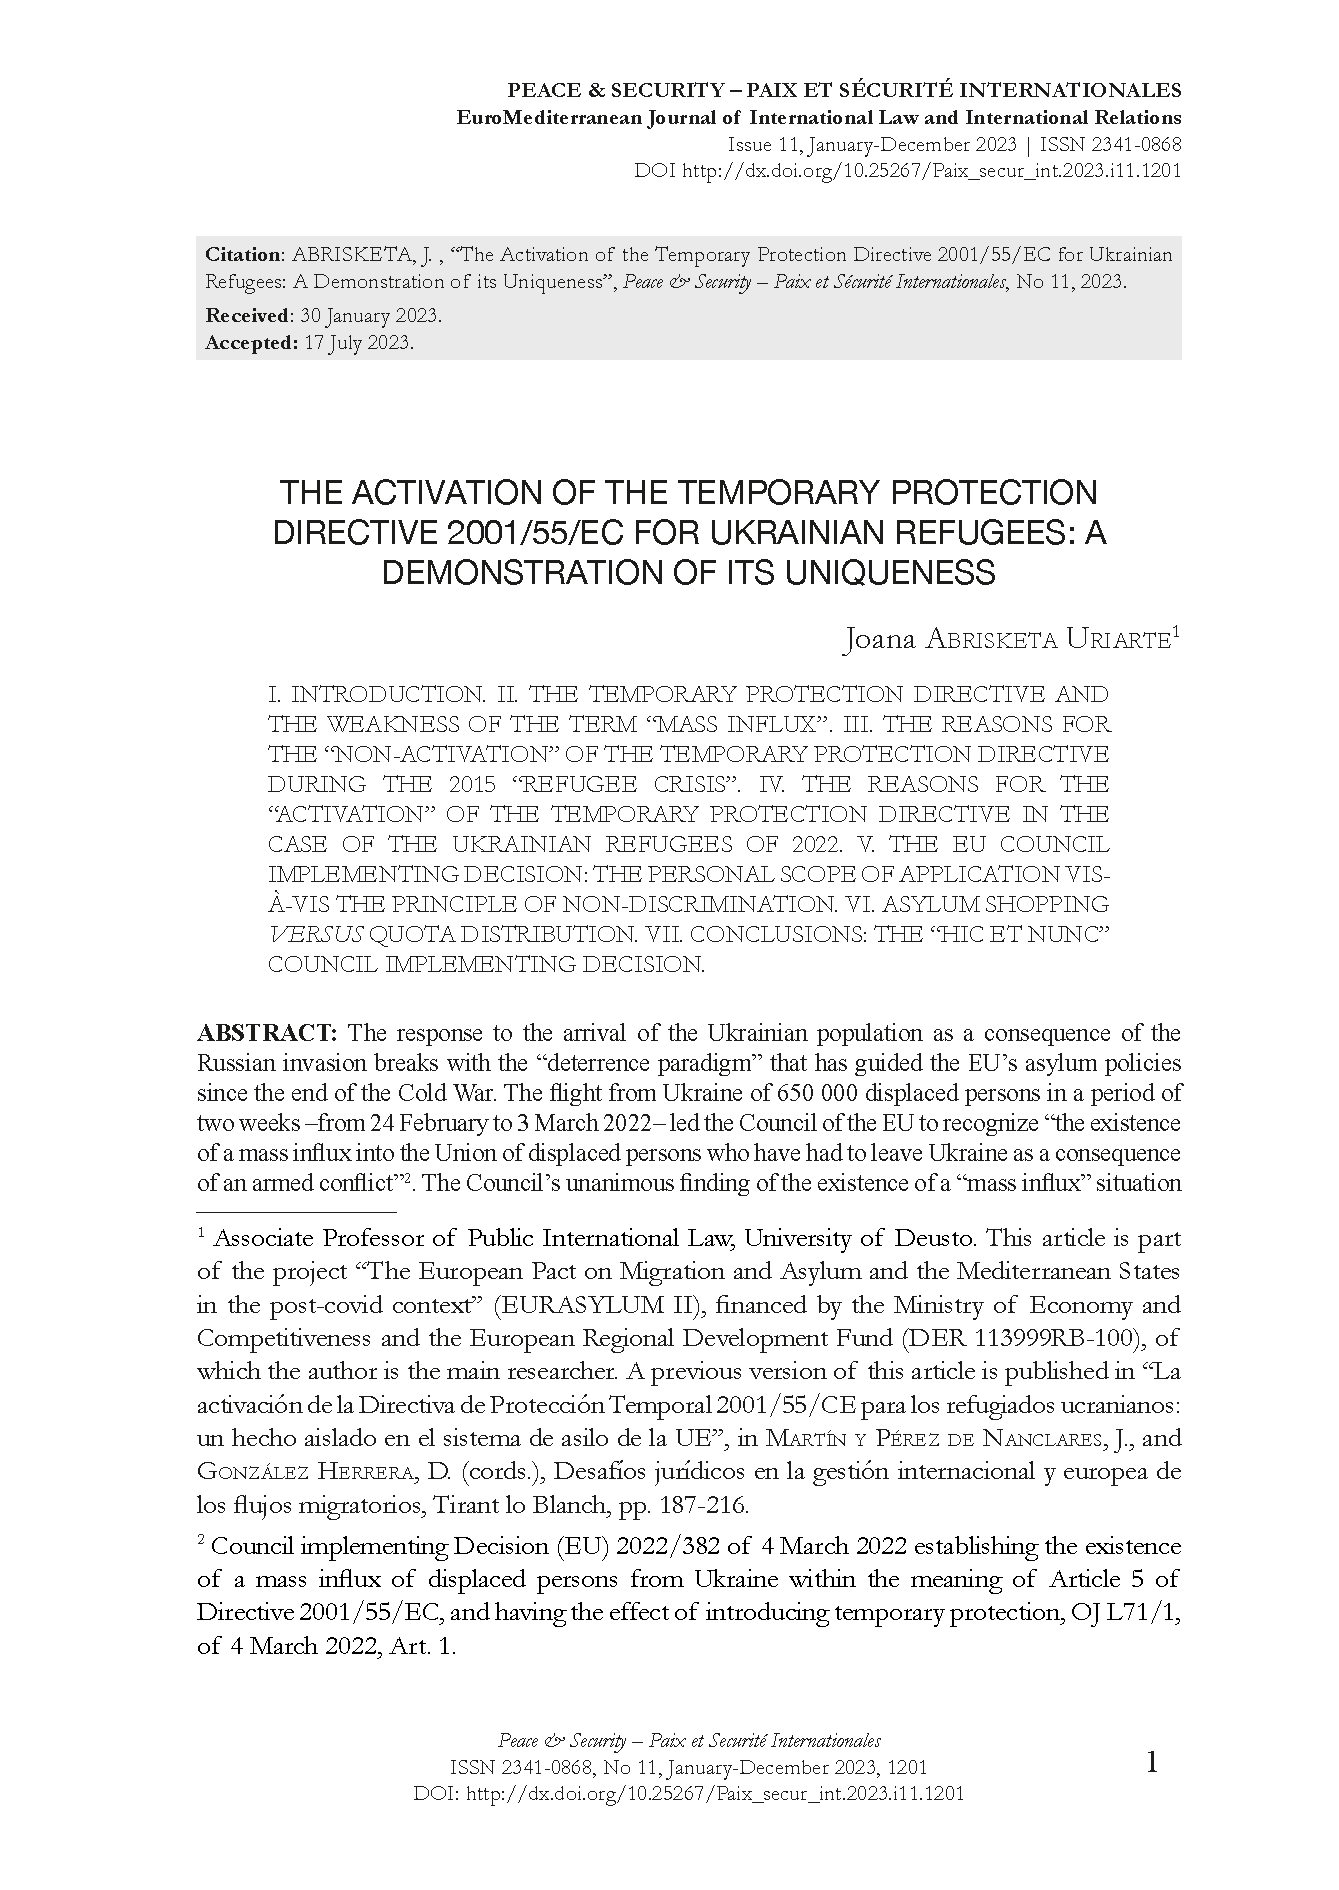 The  Activation of the Temporary Protection Directive 2001/55/CE for Ukrainian Refugees: A Demosntration of its Uniqueness